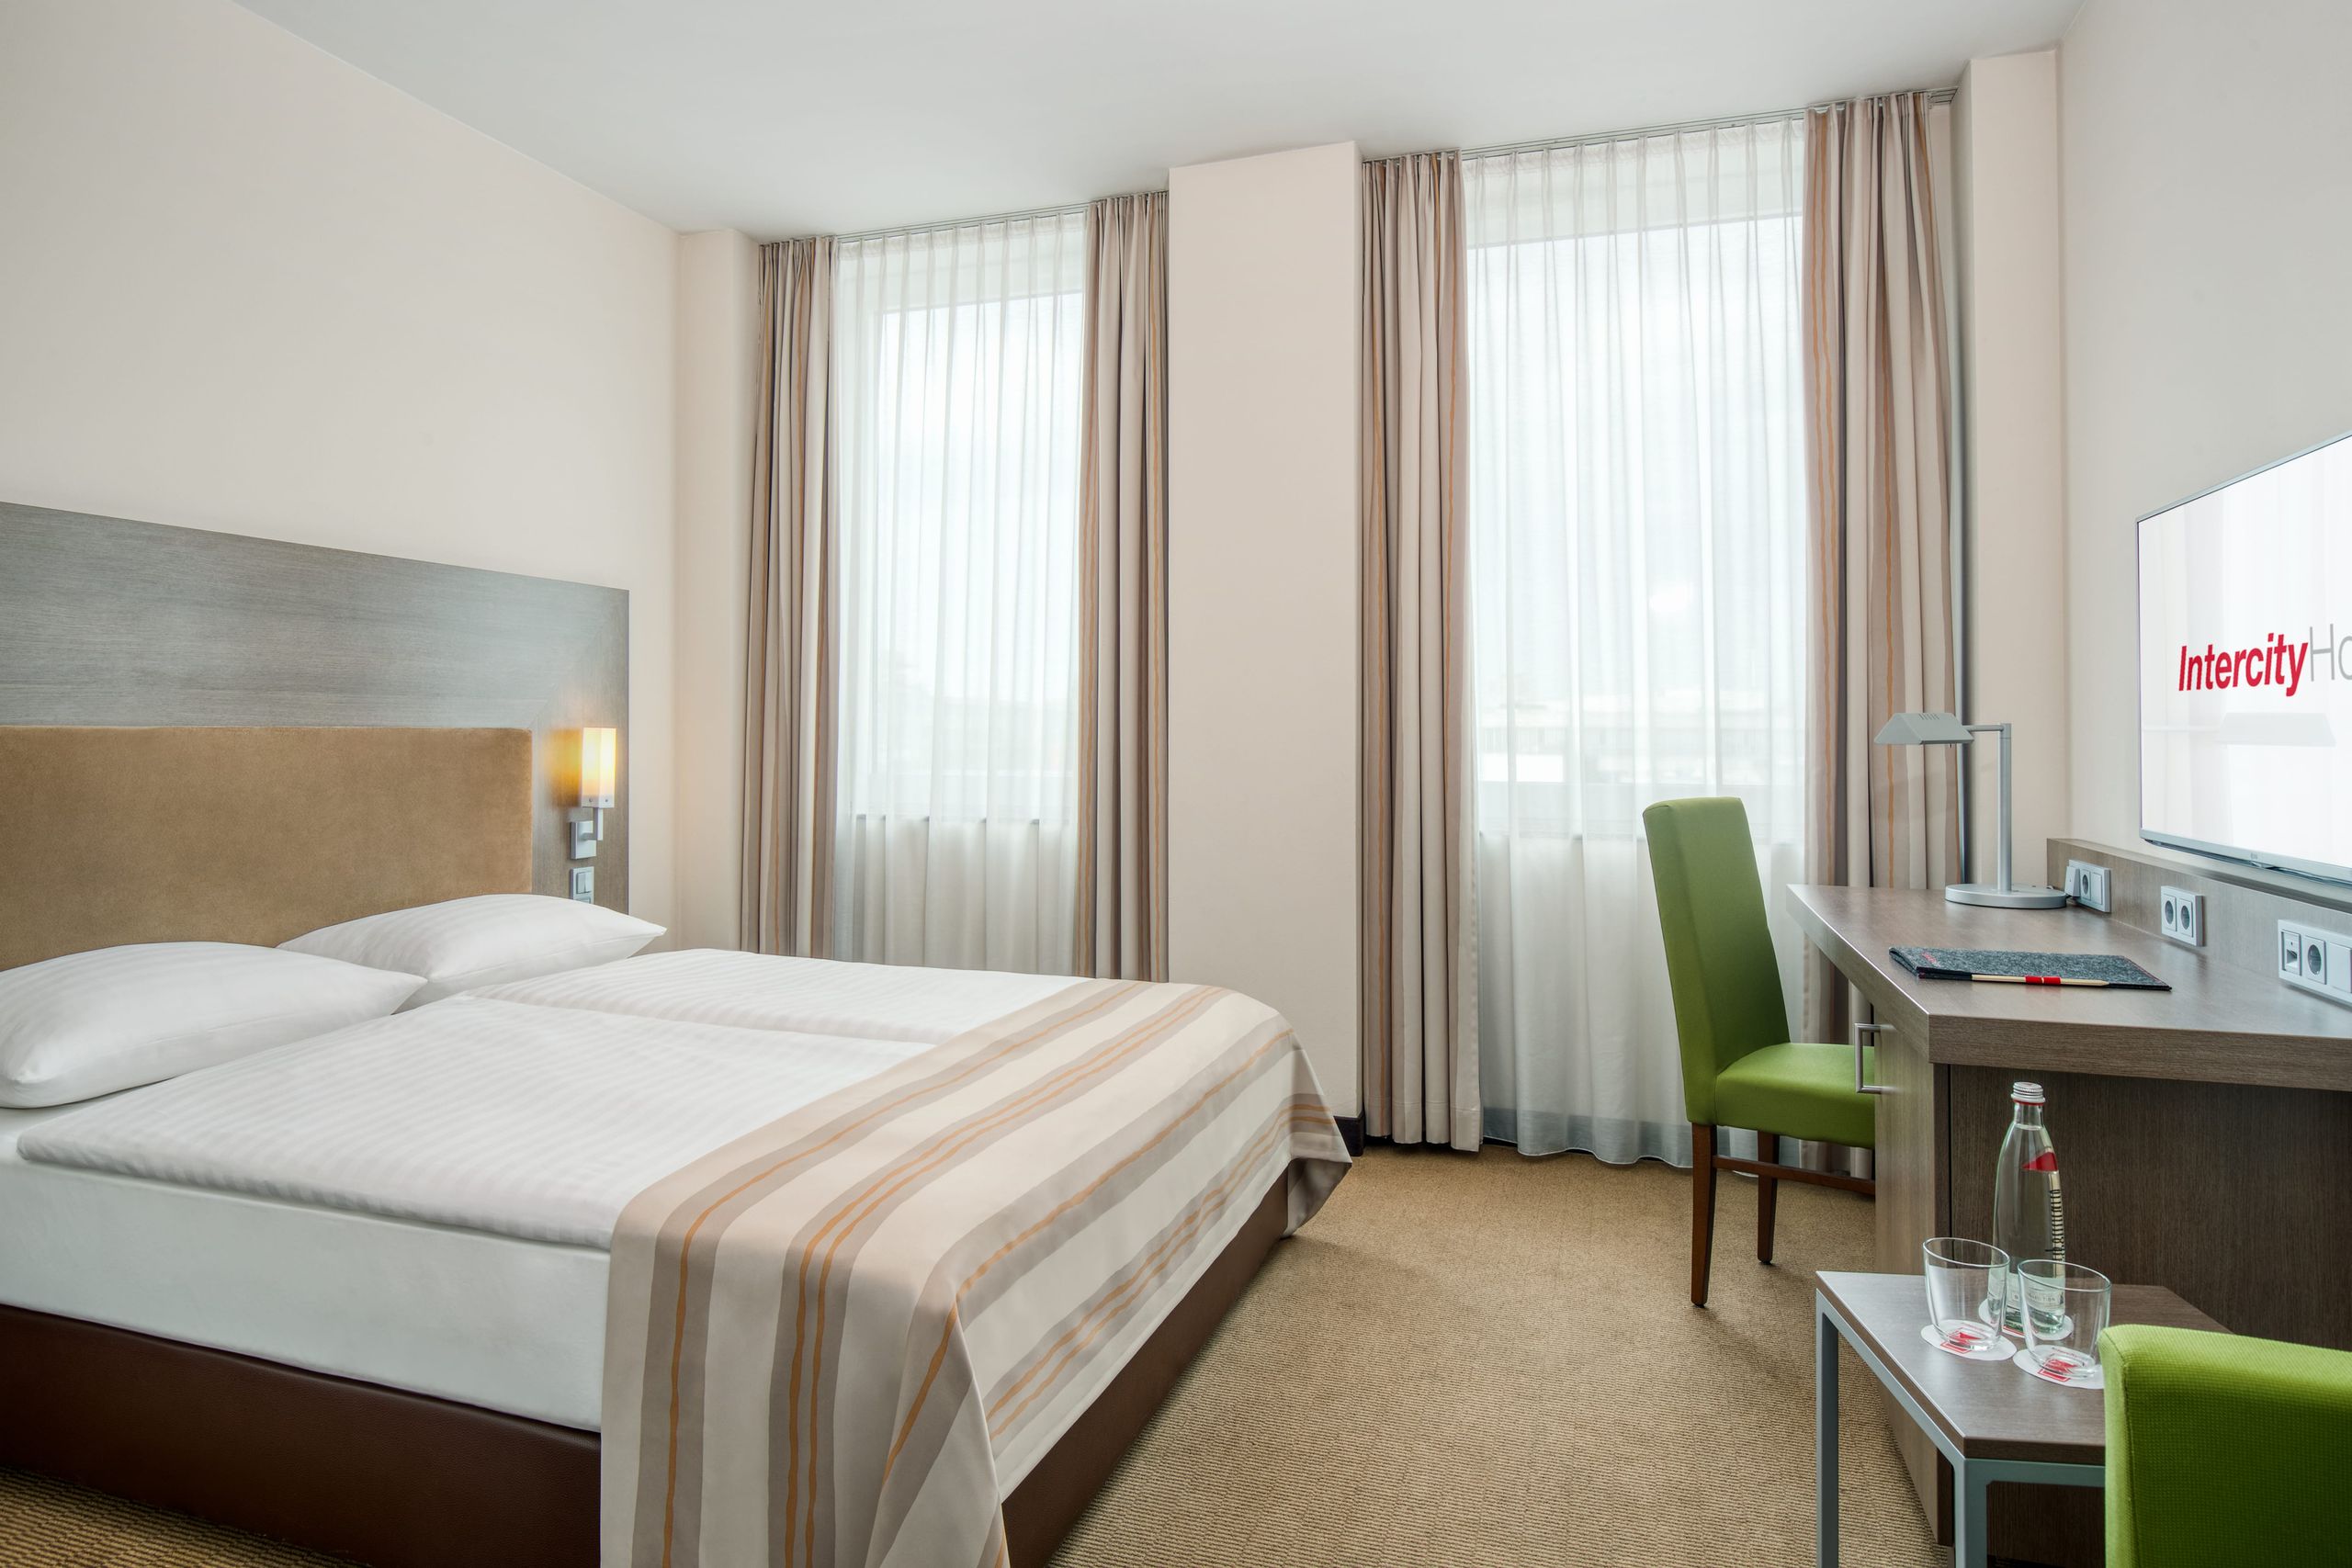 IntercityHotel Hannover - Business Room